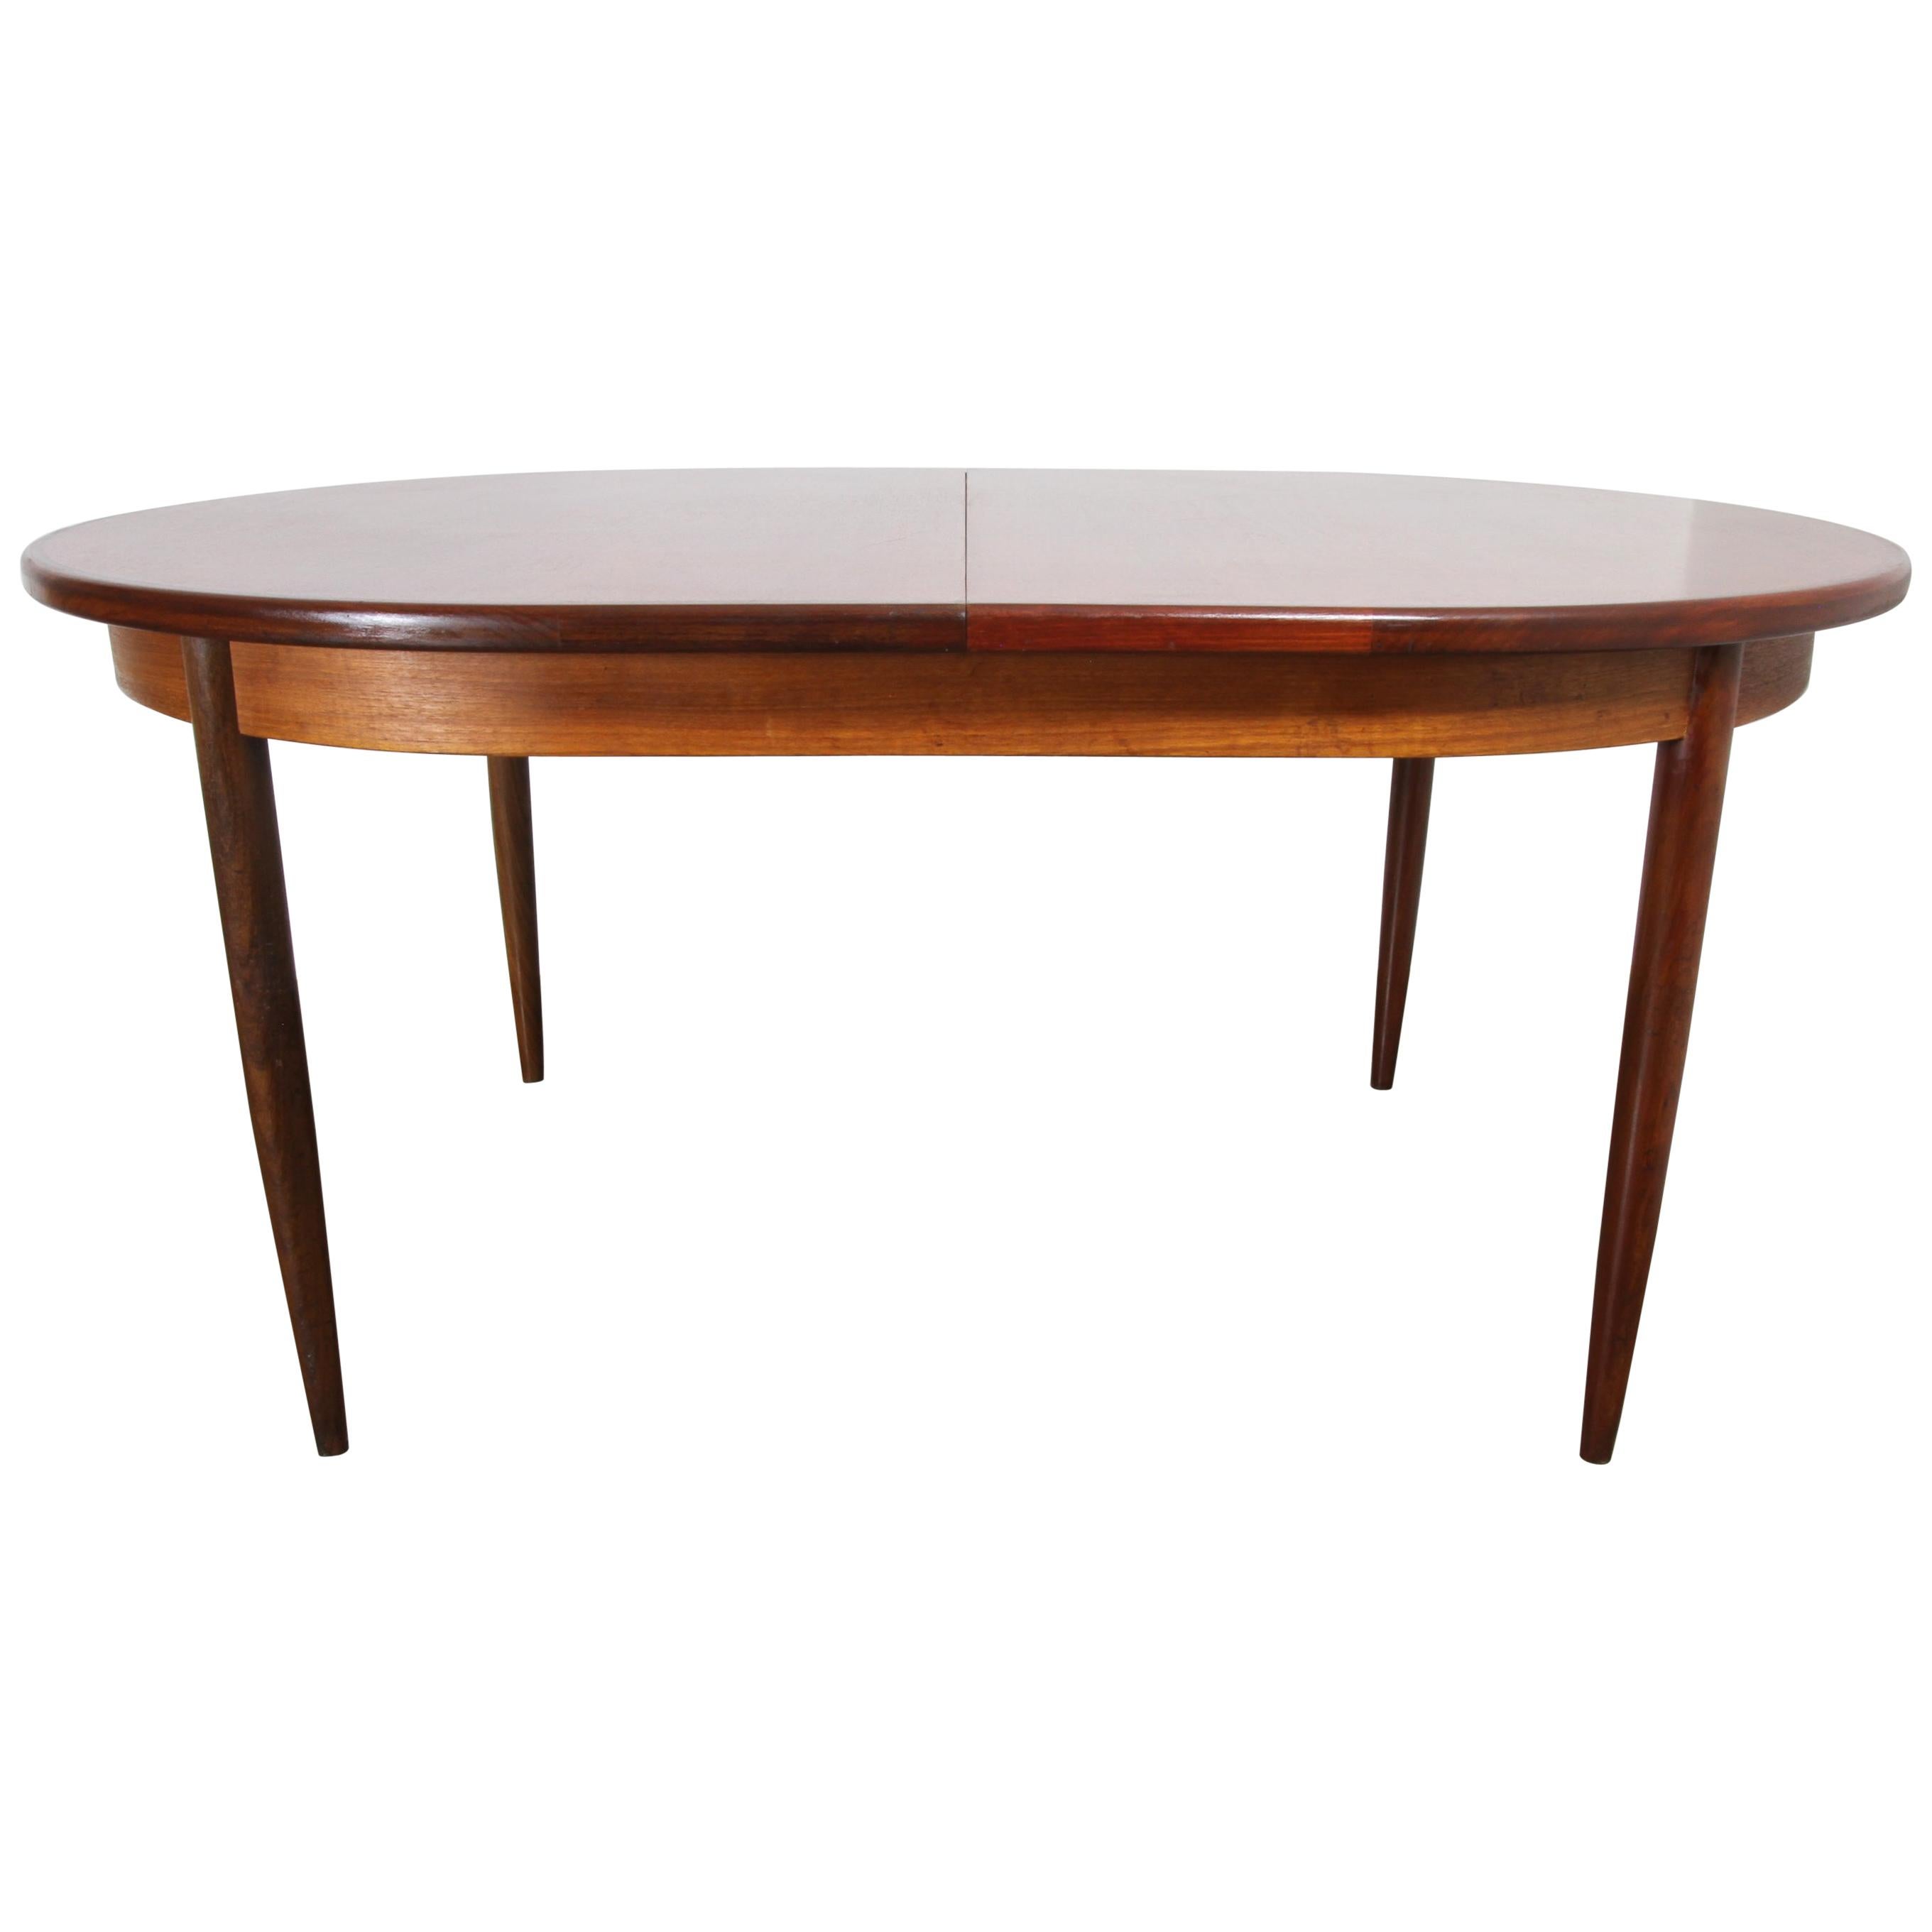 Vintage Oval Extendable Teak and Redwood Dining Table by G-Plan, 1960s